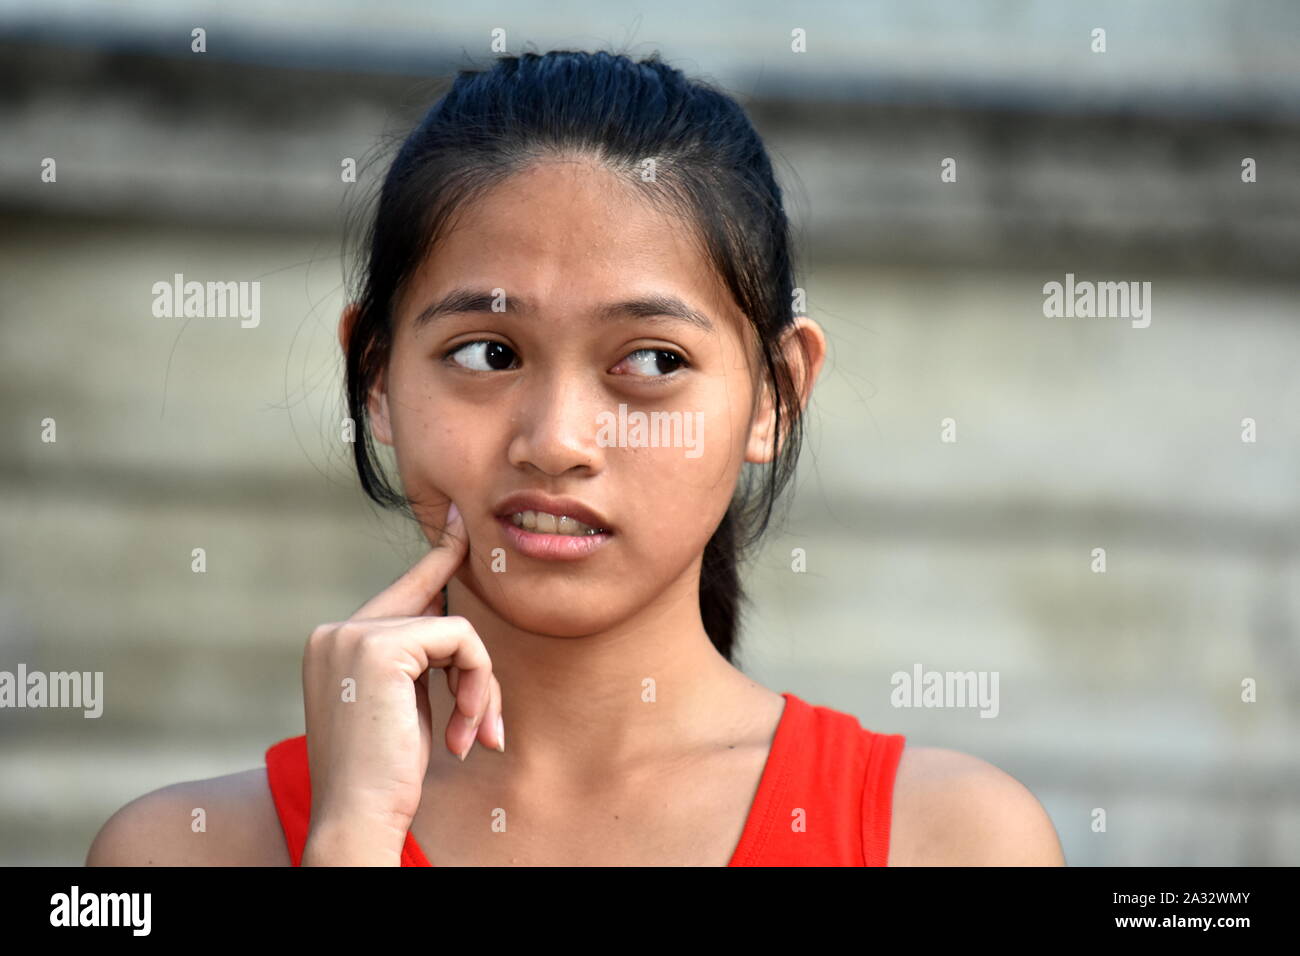 An A Youngster With Toothache Stock Photo